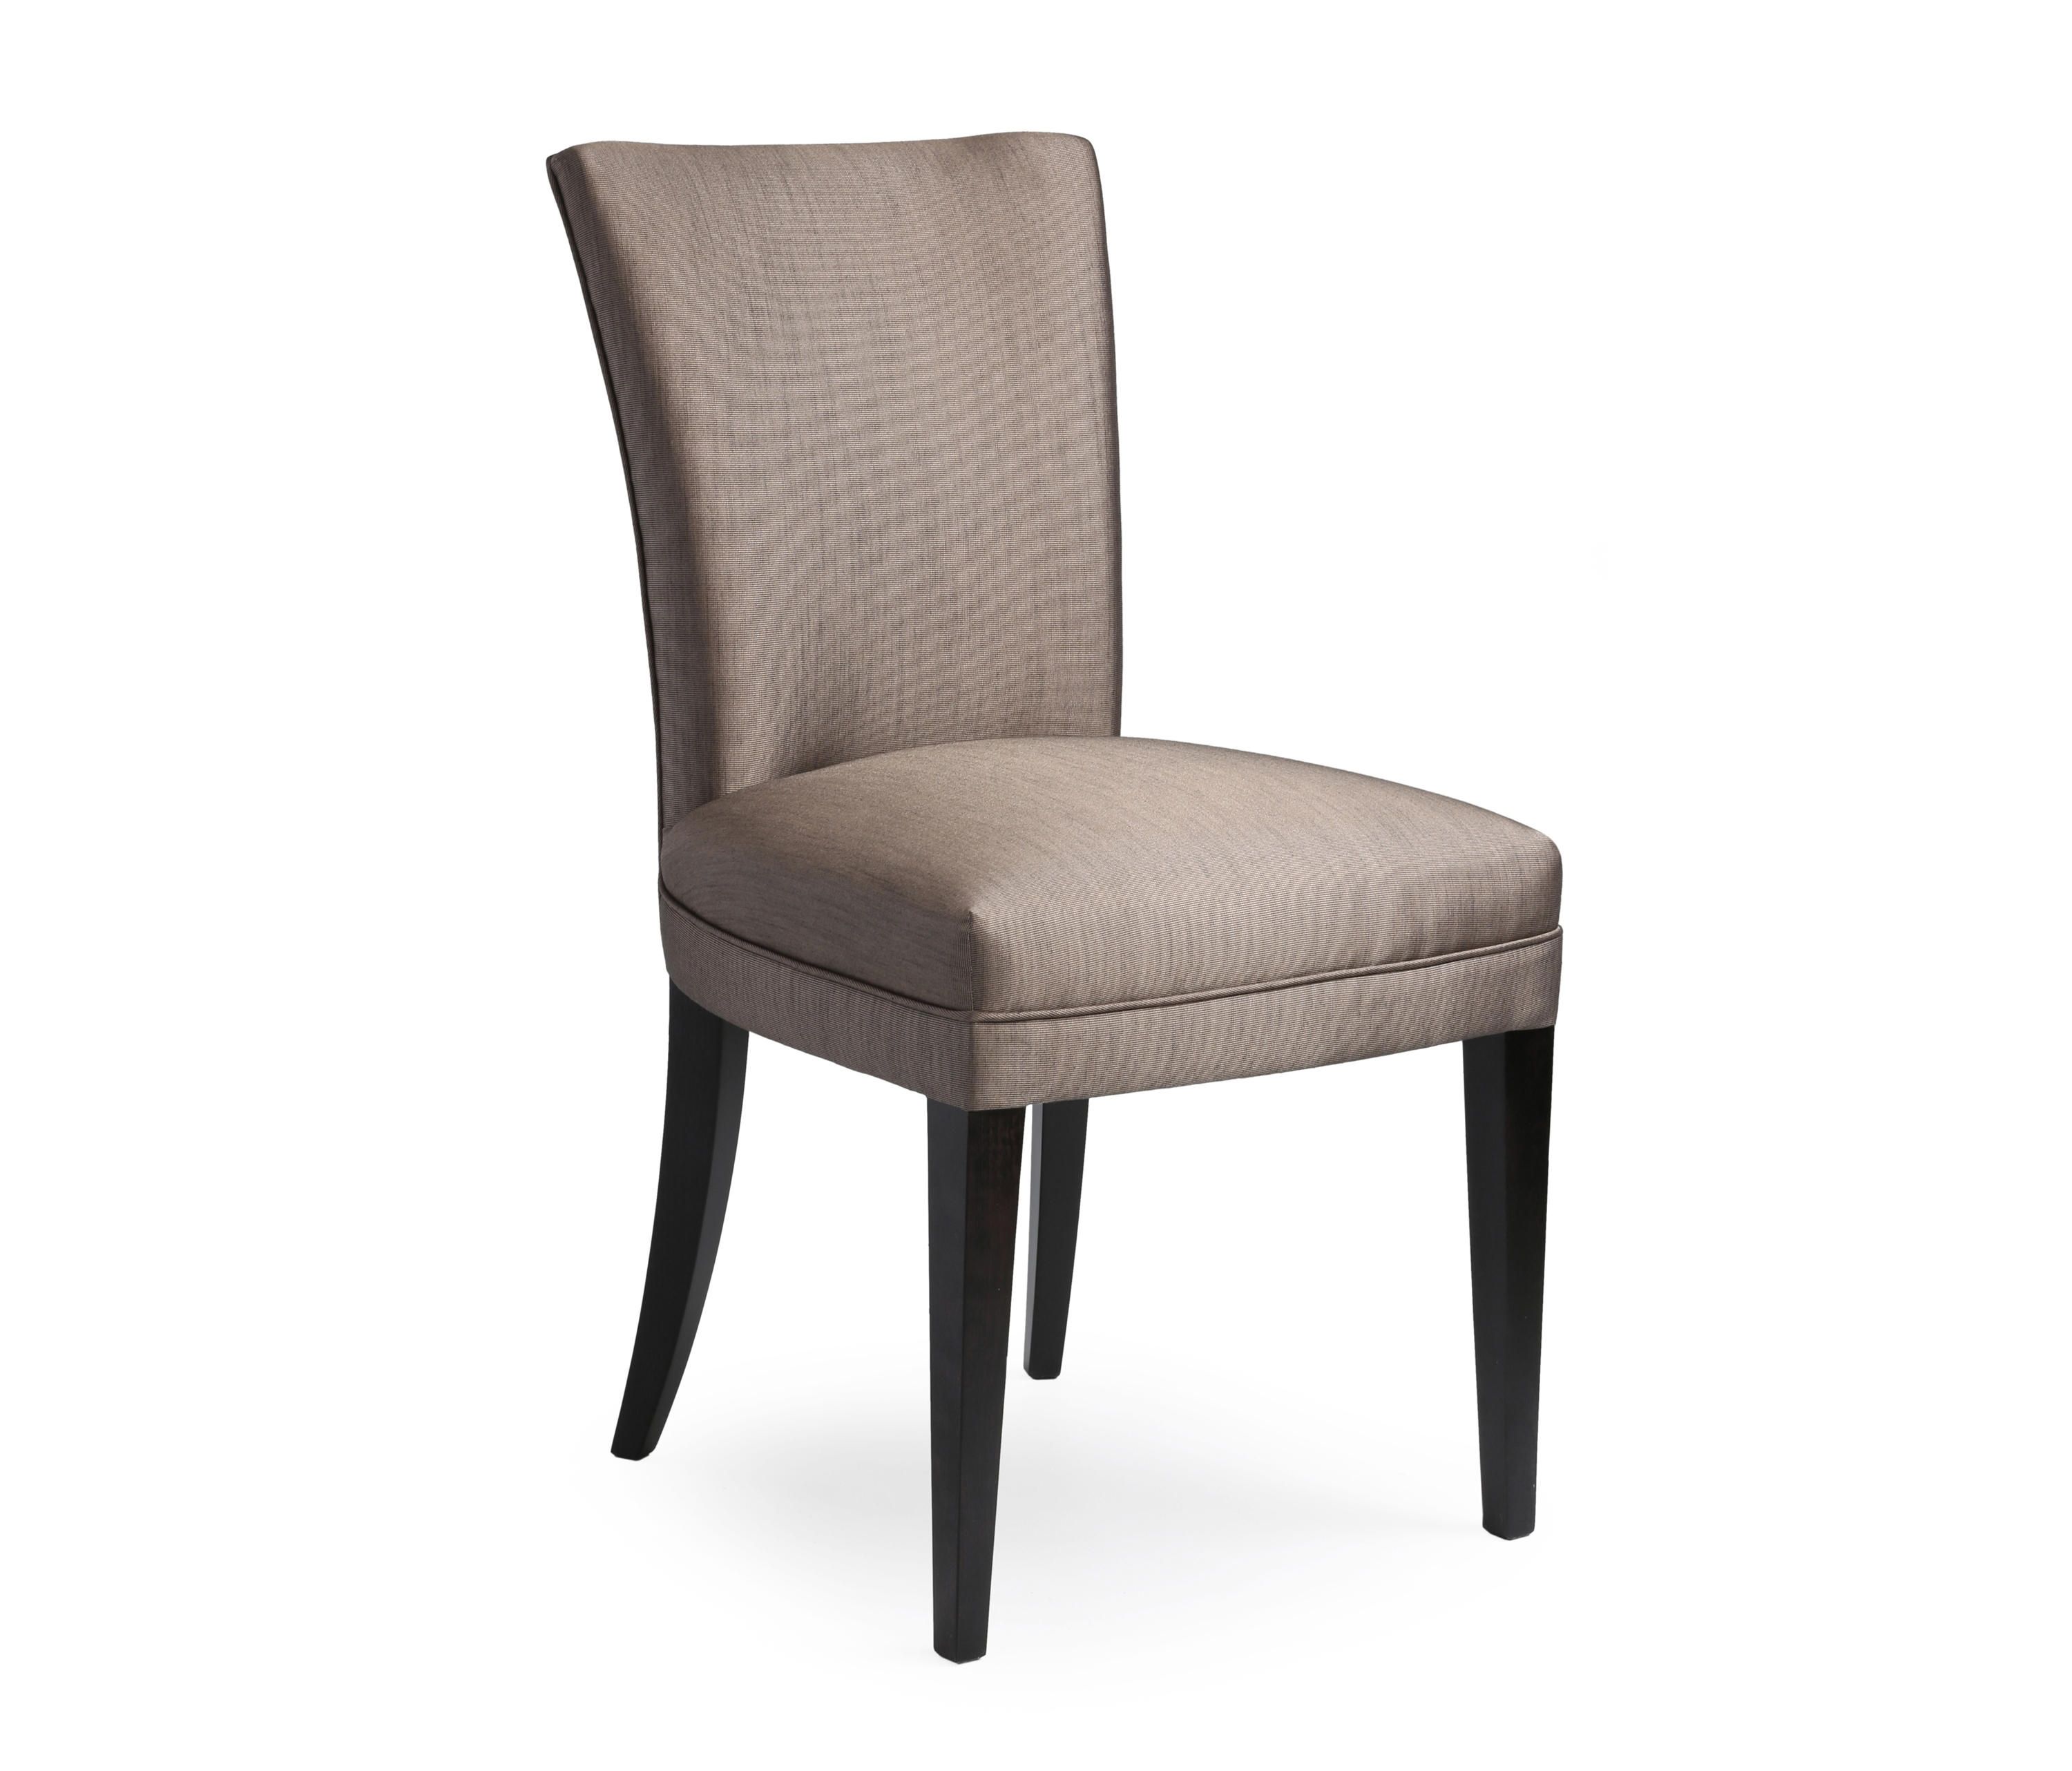 Most Recent Sofa With Chairs For Paris Dining Chair – Restaurant Chairs From The Sofa & Chair (View 6 of 15)